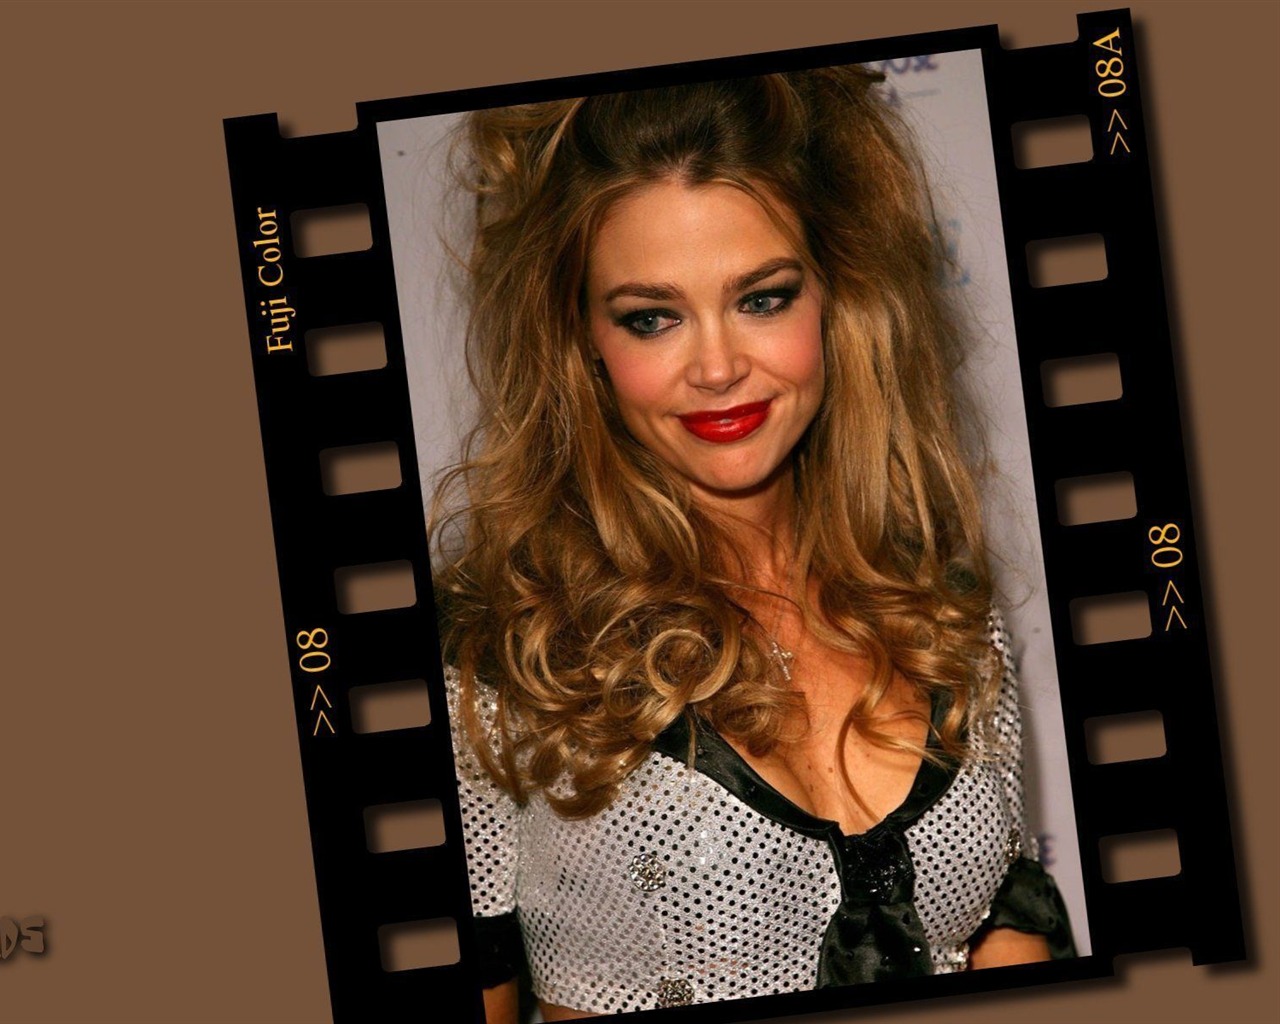 Denise Richards #006 - 1280x1024 Wallpapers Pictures Photos Images